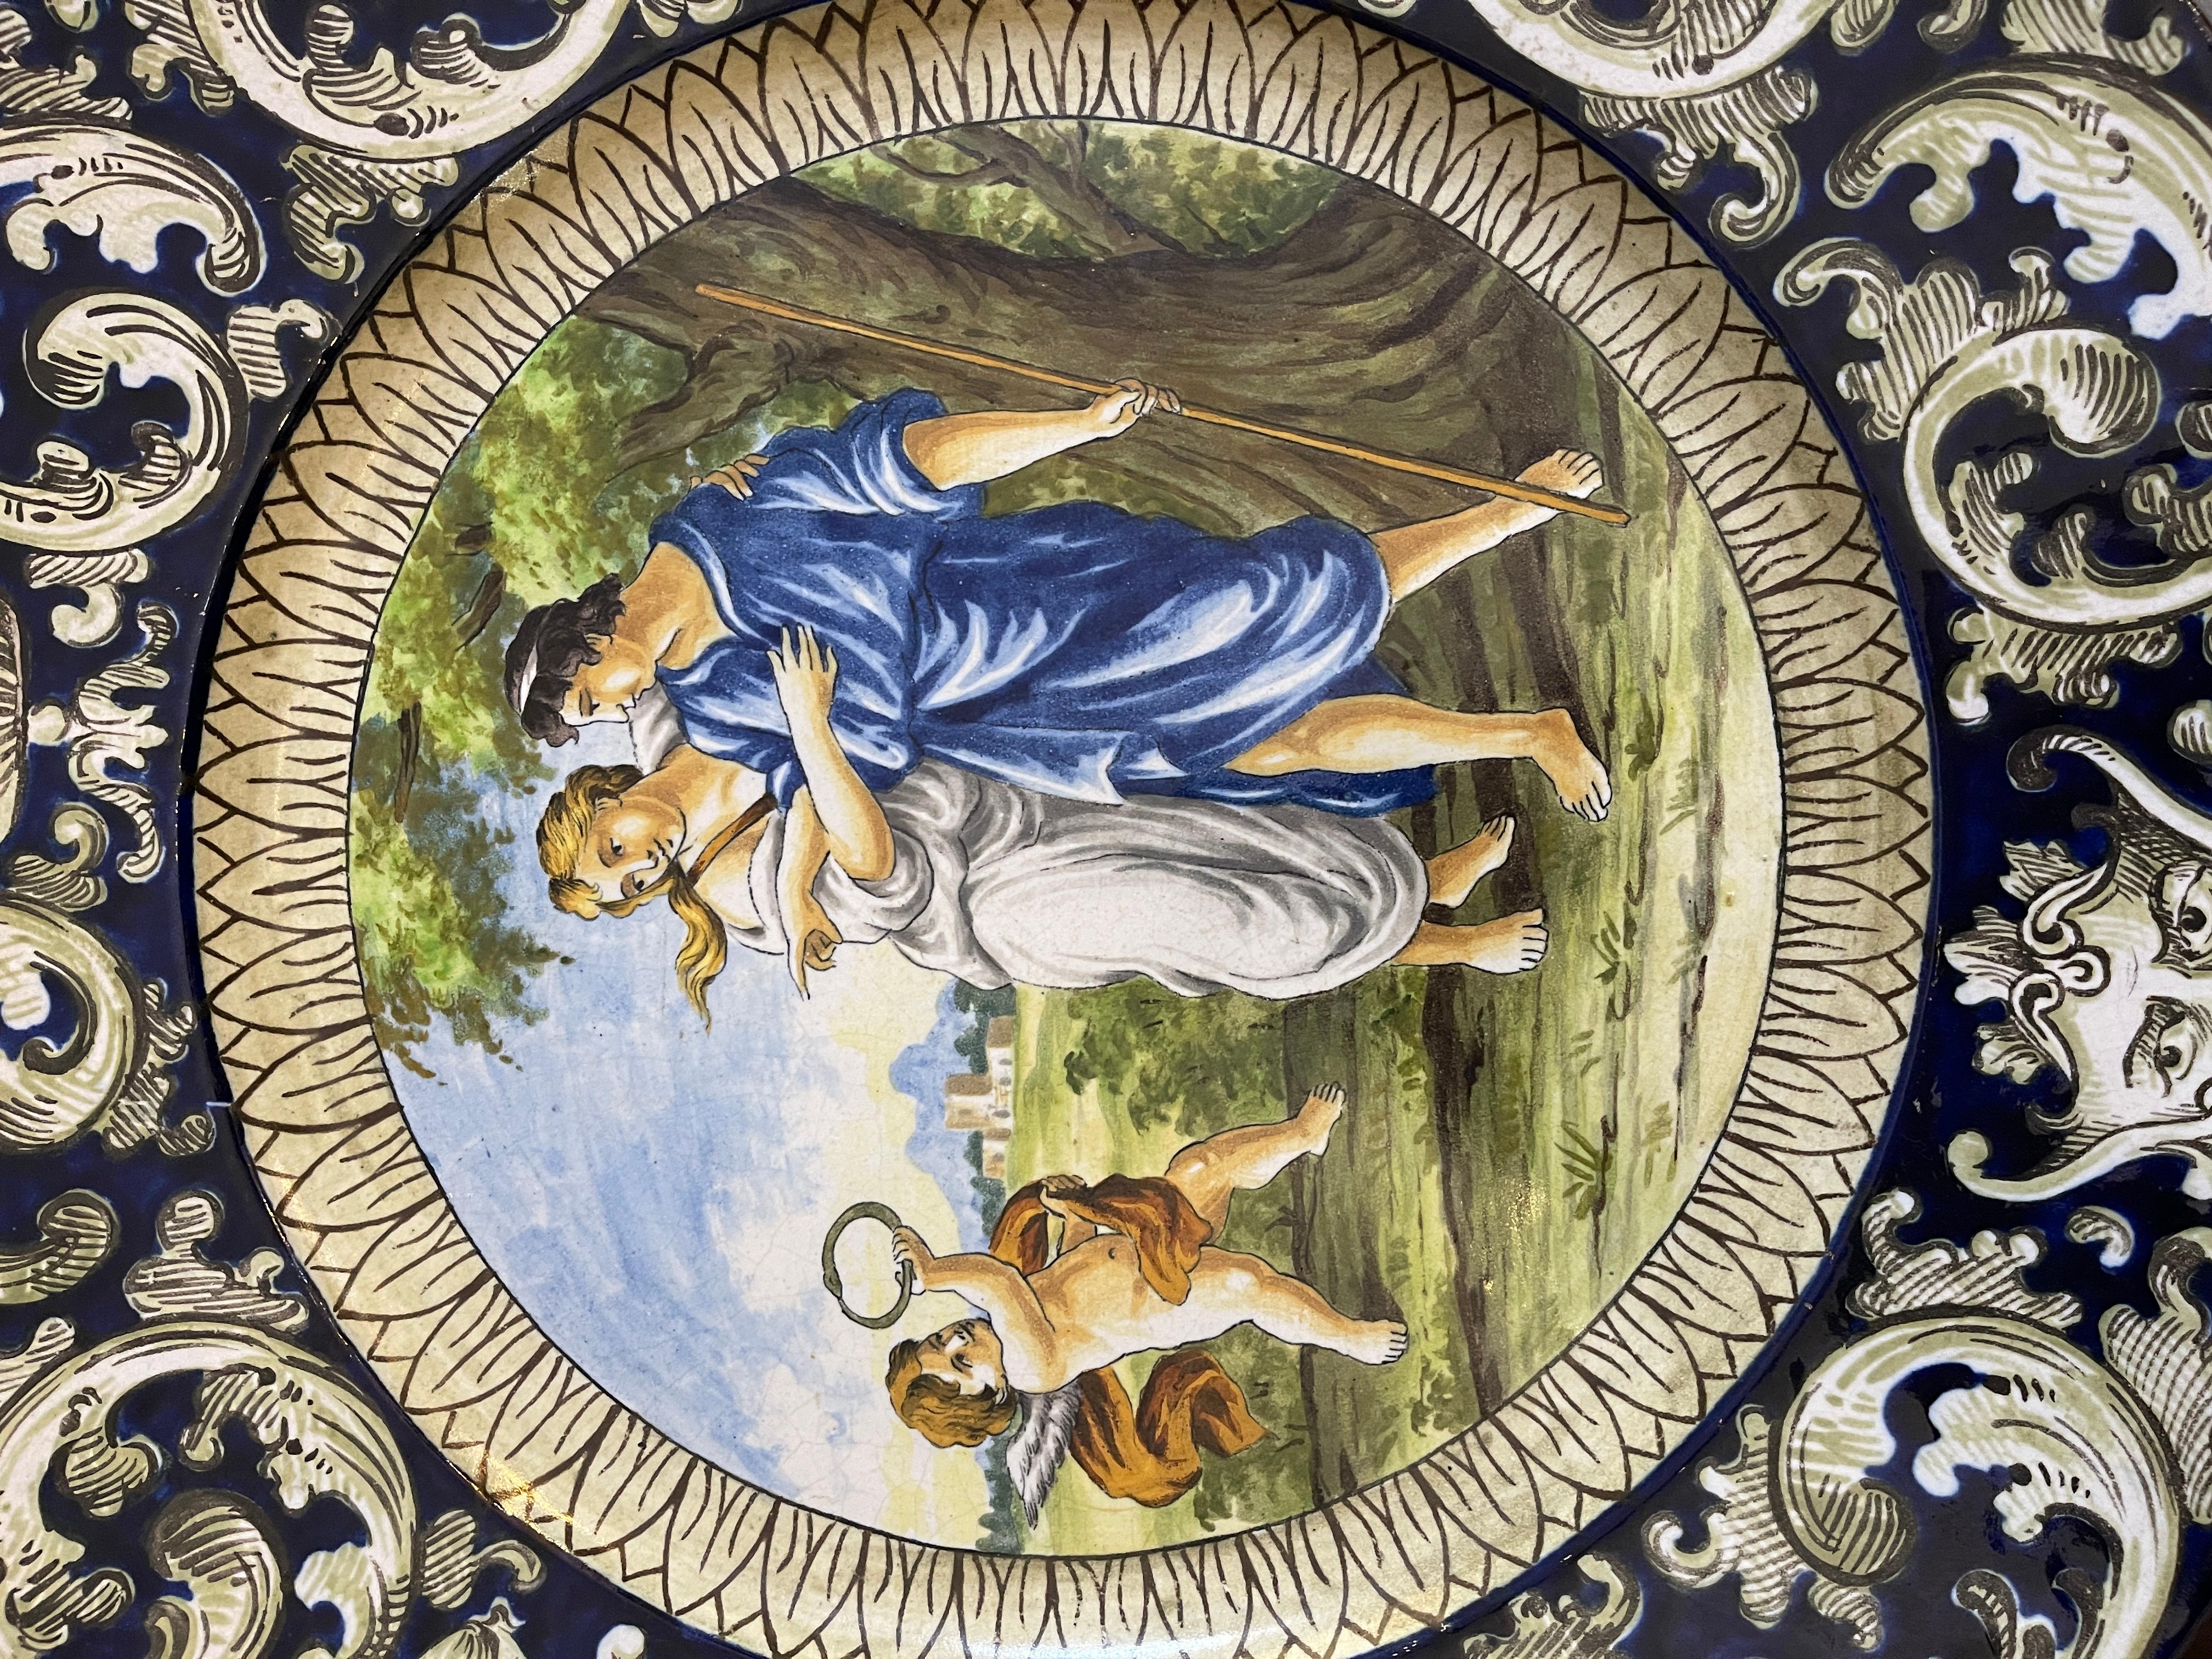 Decorated ceramic plate, 19th century, mythological scene
Large ceramic plate, decorative object with hook to be mounted on the wall, made in the first half of the 19th century, depicts a mythological scene, decoration along the edges typical of the